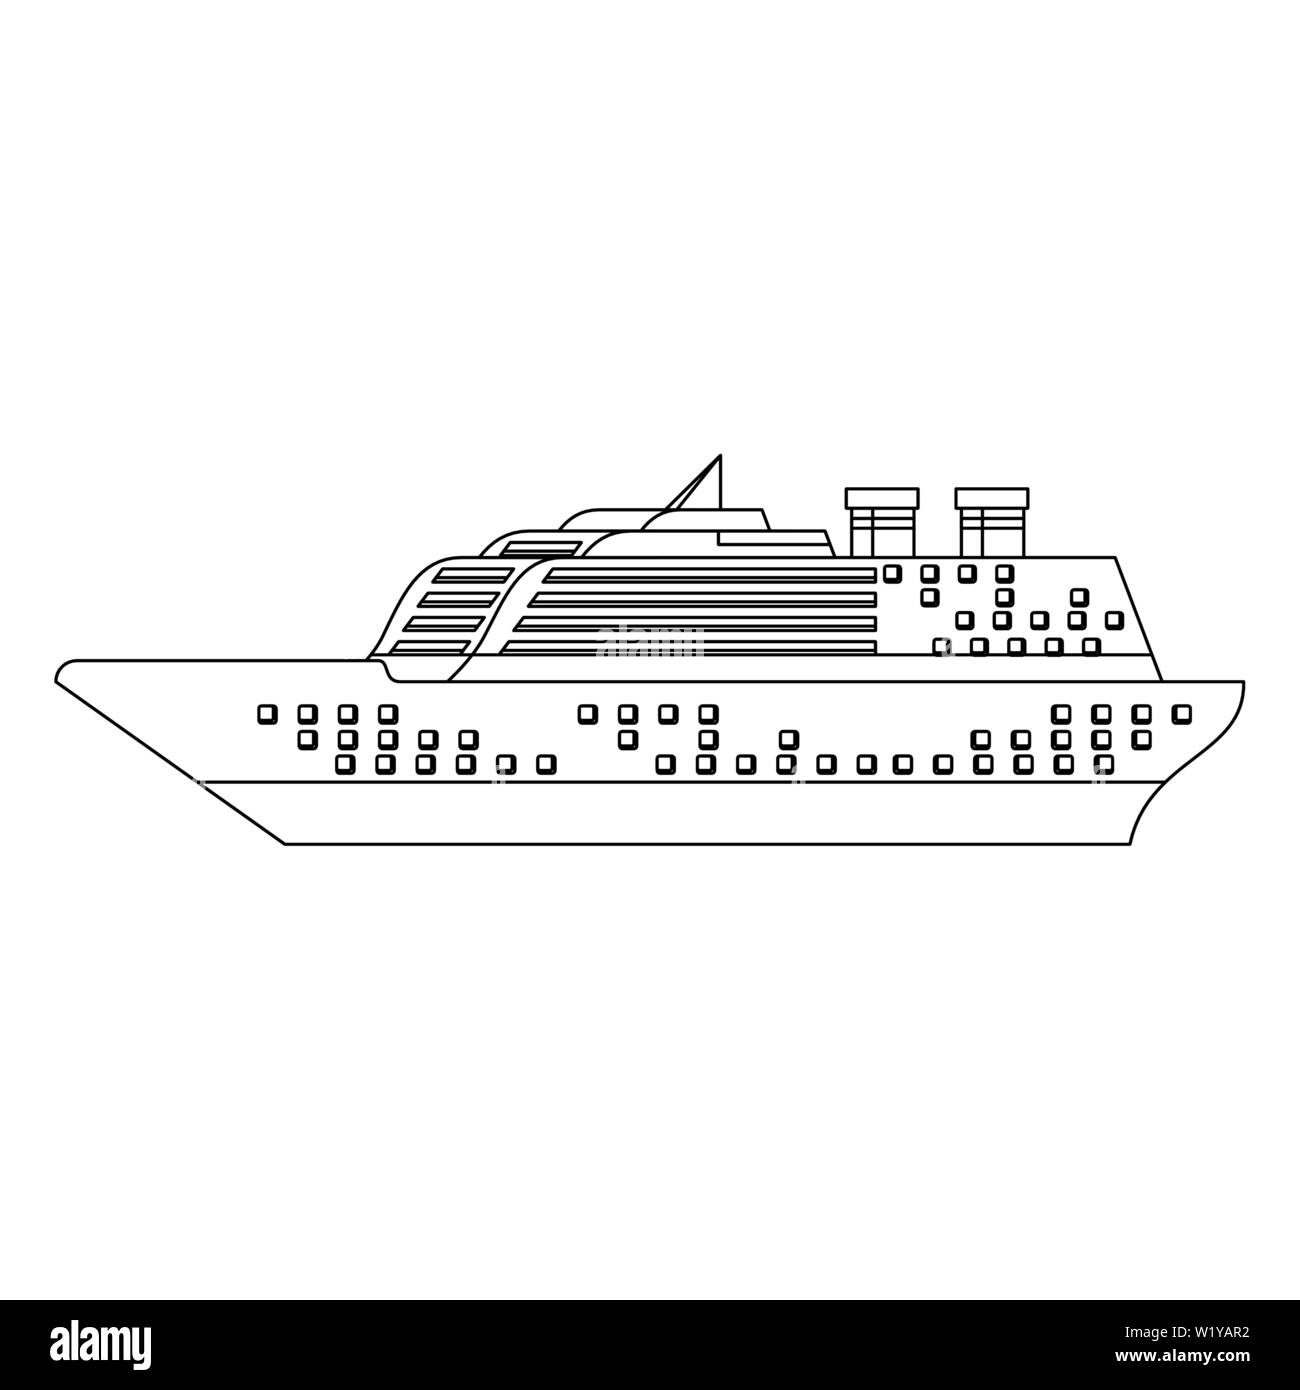 How to Draw a Realistic Cruise Ship - 2 Point Perspective/Colouring  Tutorial - YouTube